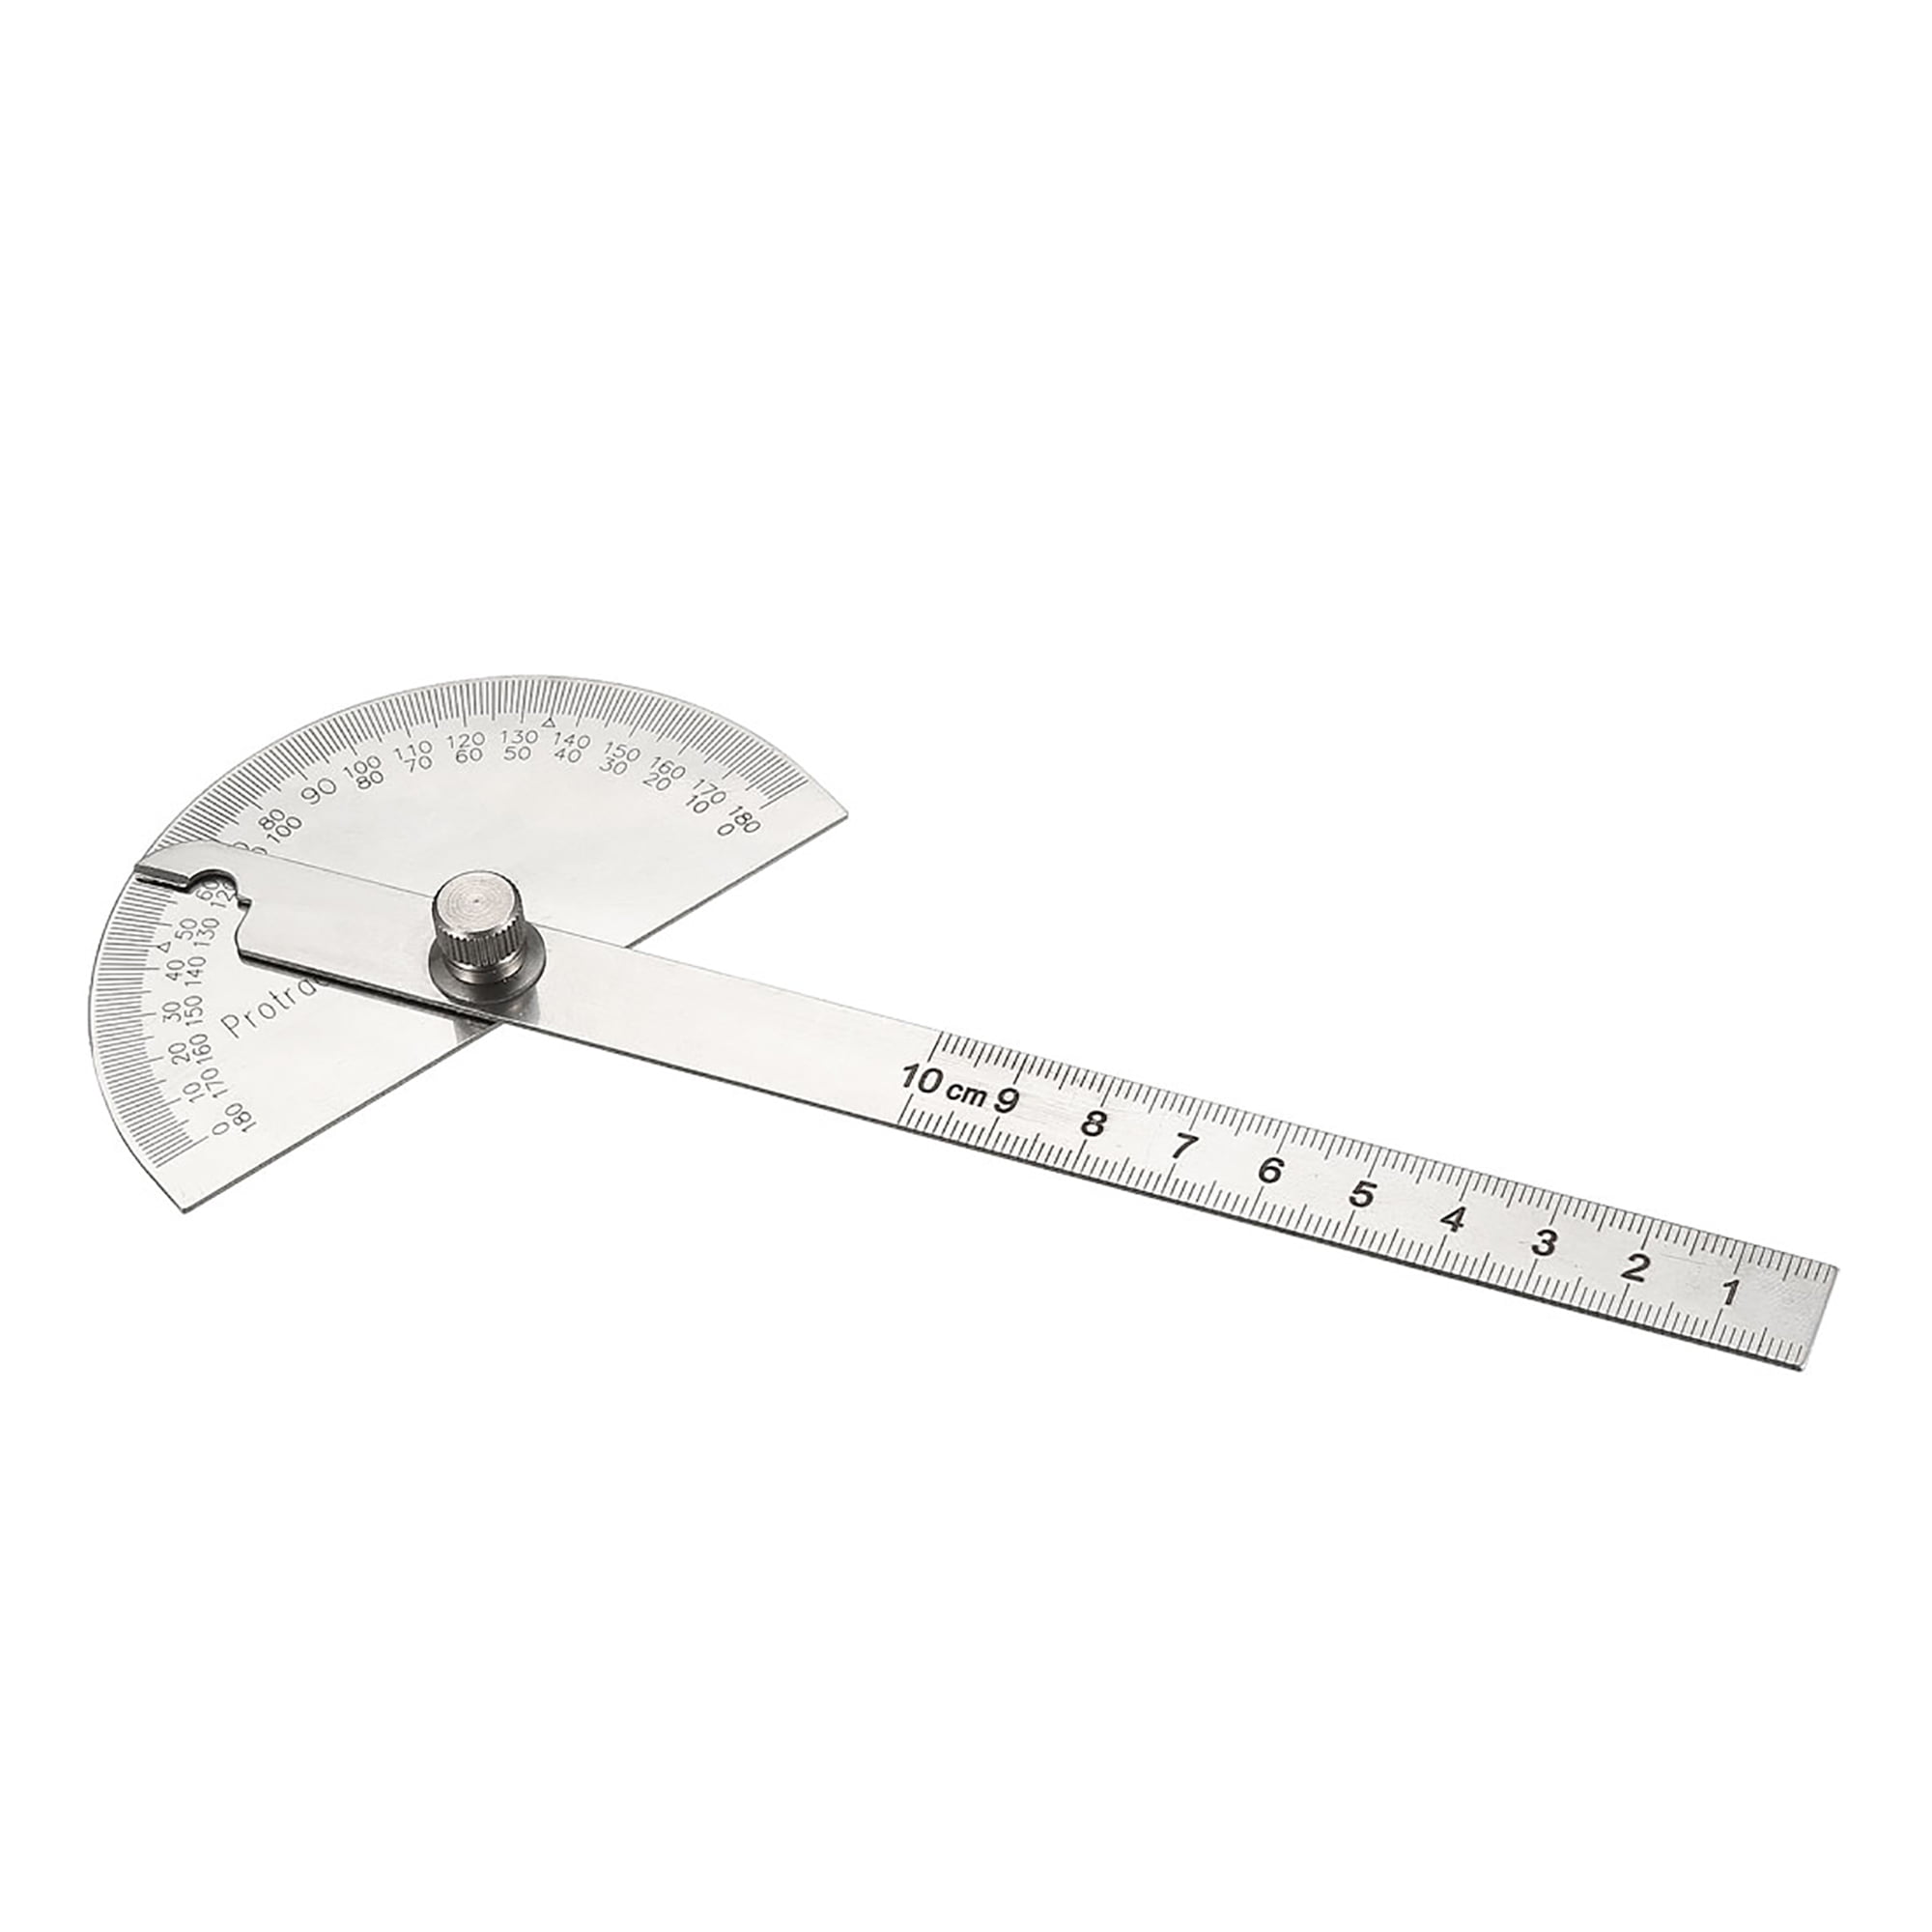 New And High Quality Steel Round Head 0-180 Degree Protractor Angle Ruler 